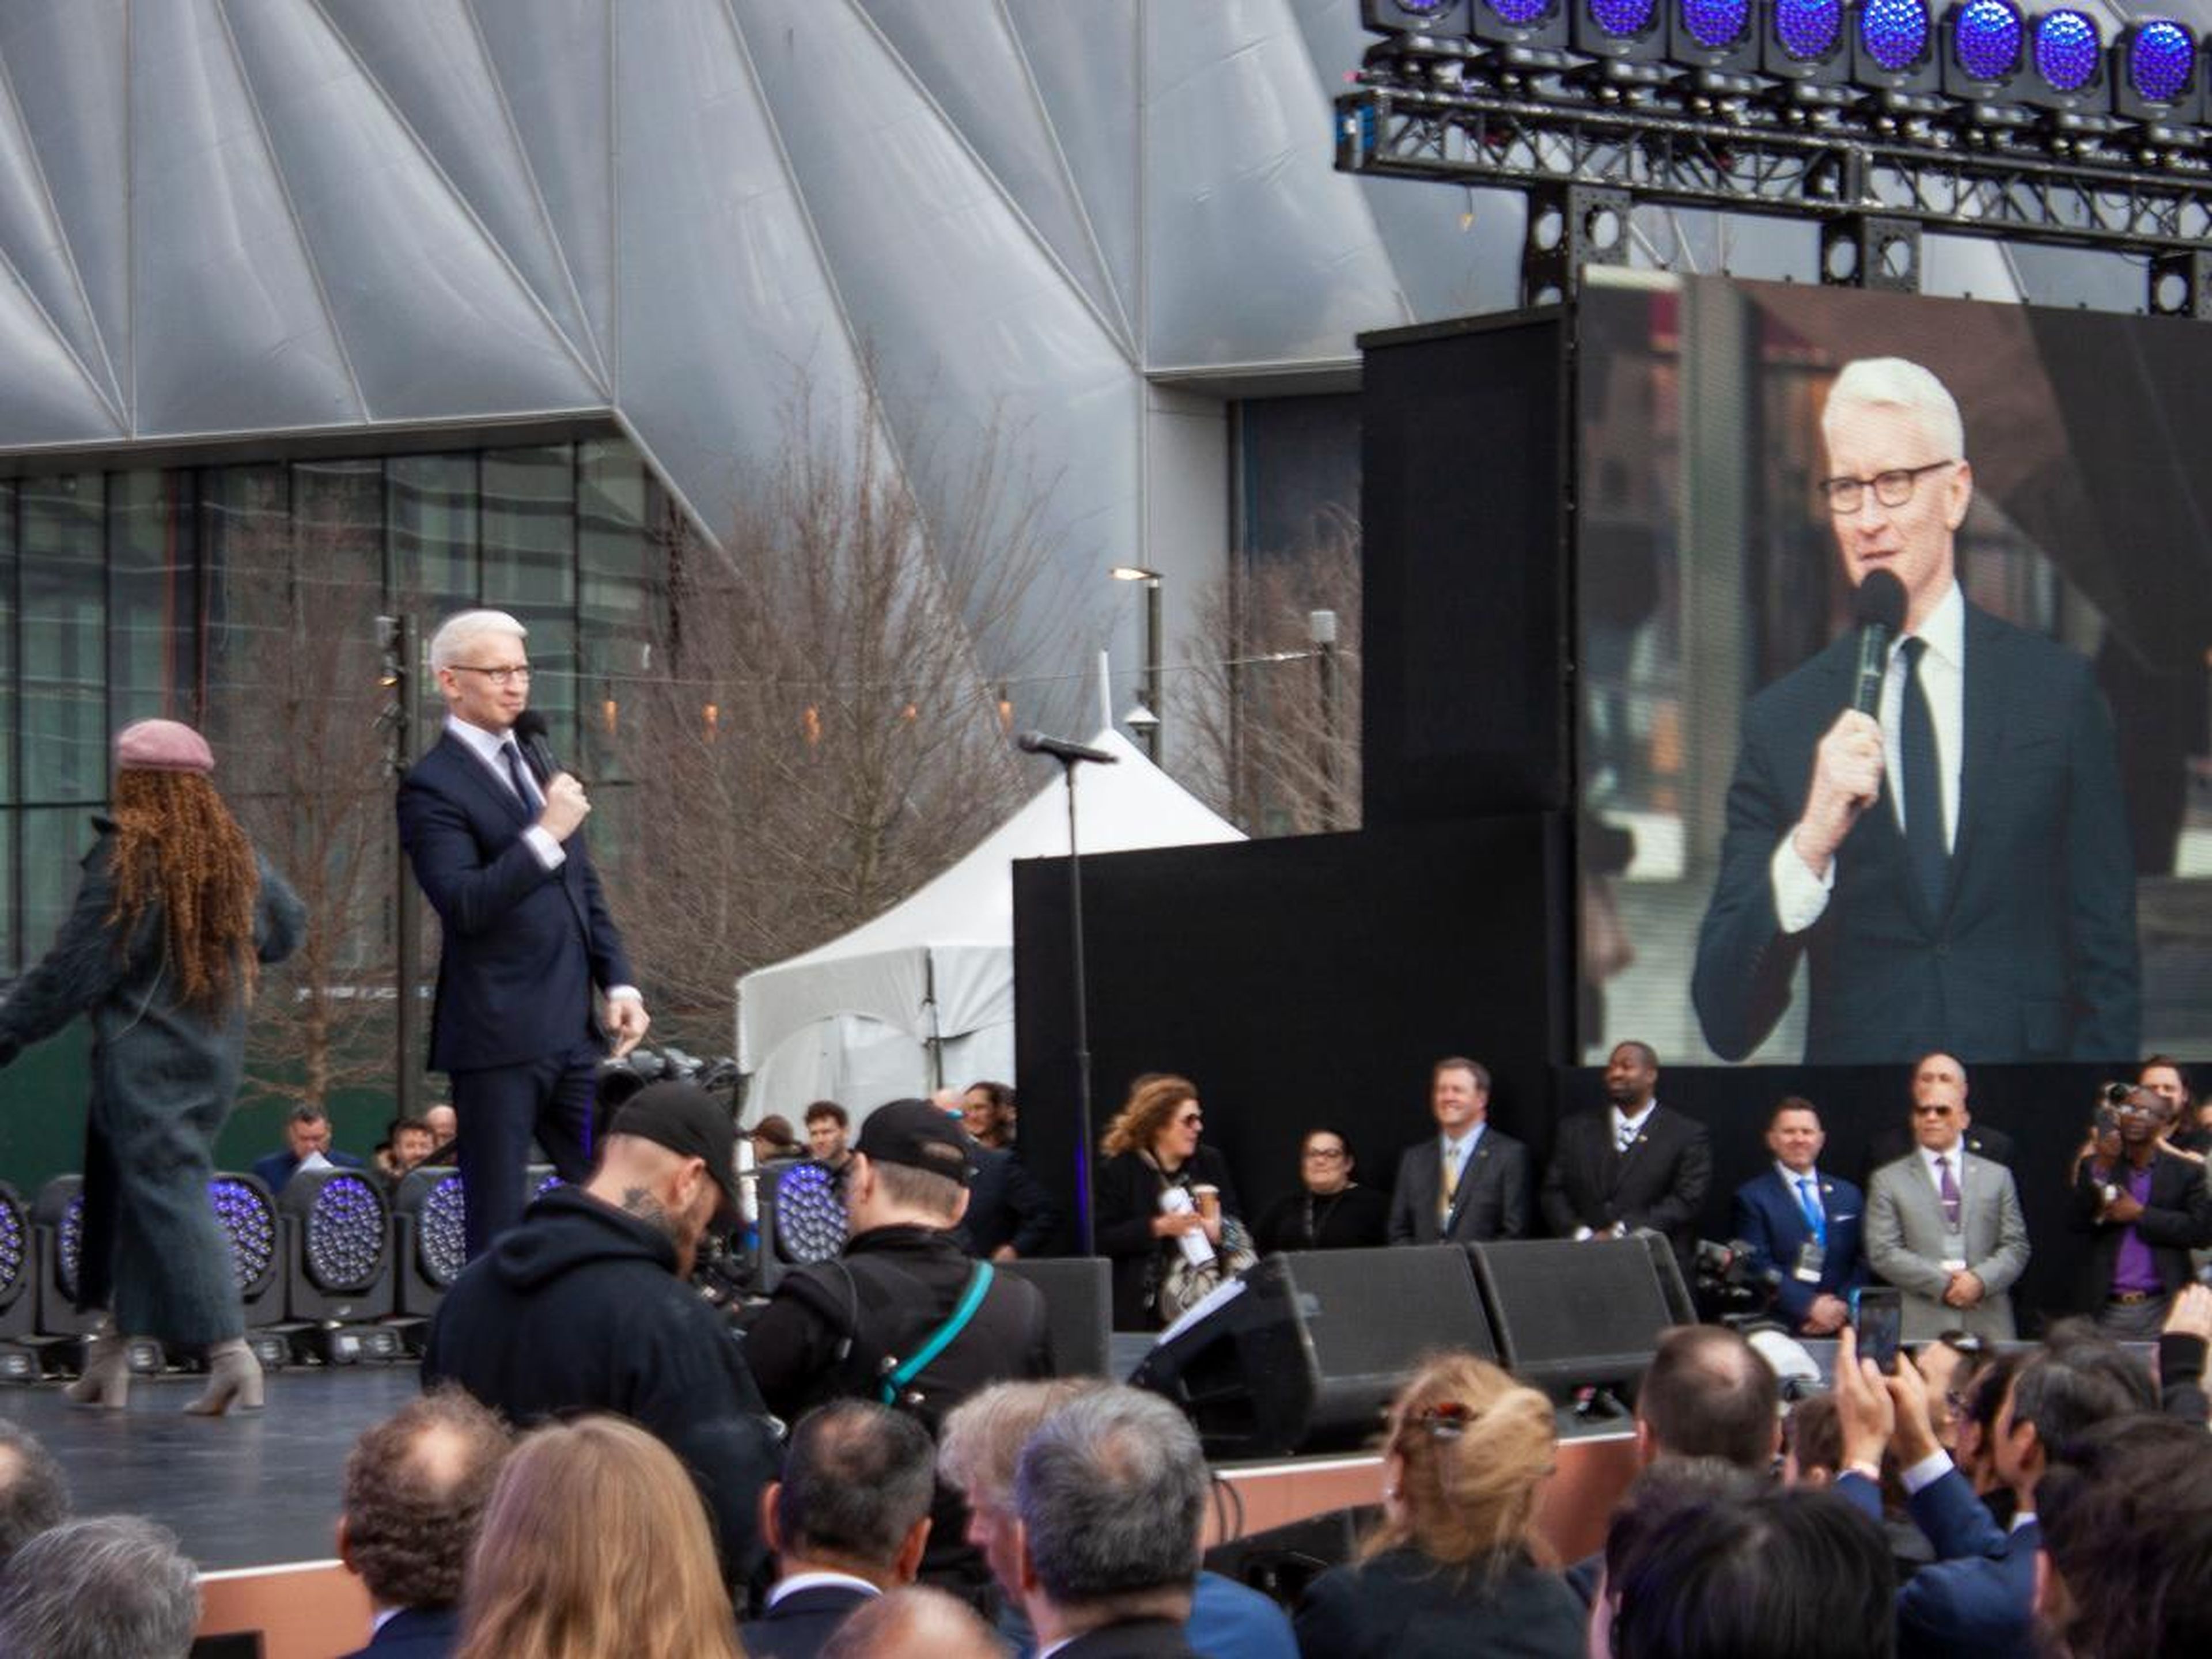 Musician Andra Day performed and CNN's Anderson Cooper told the crowd about how his company will eventually be moving into a Hudson Yards office.